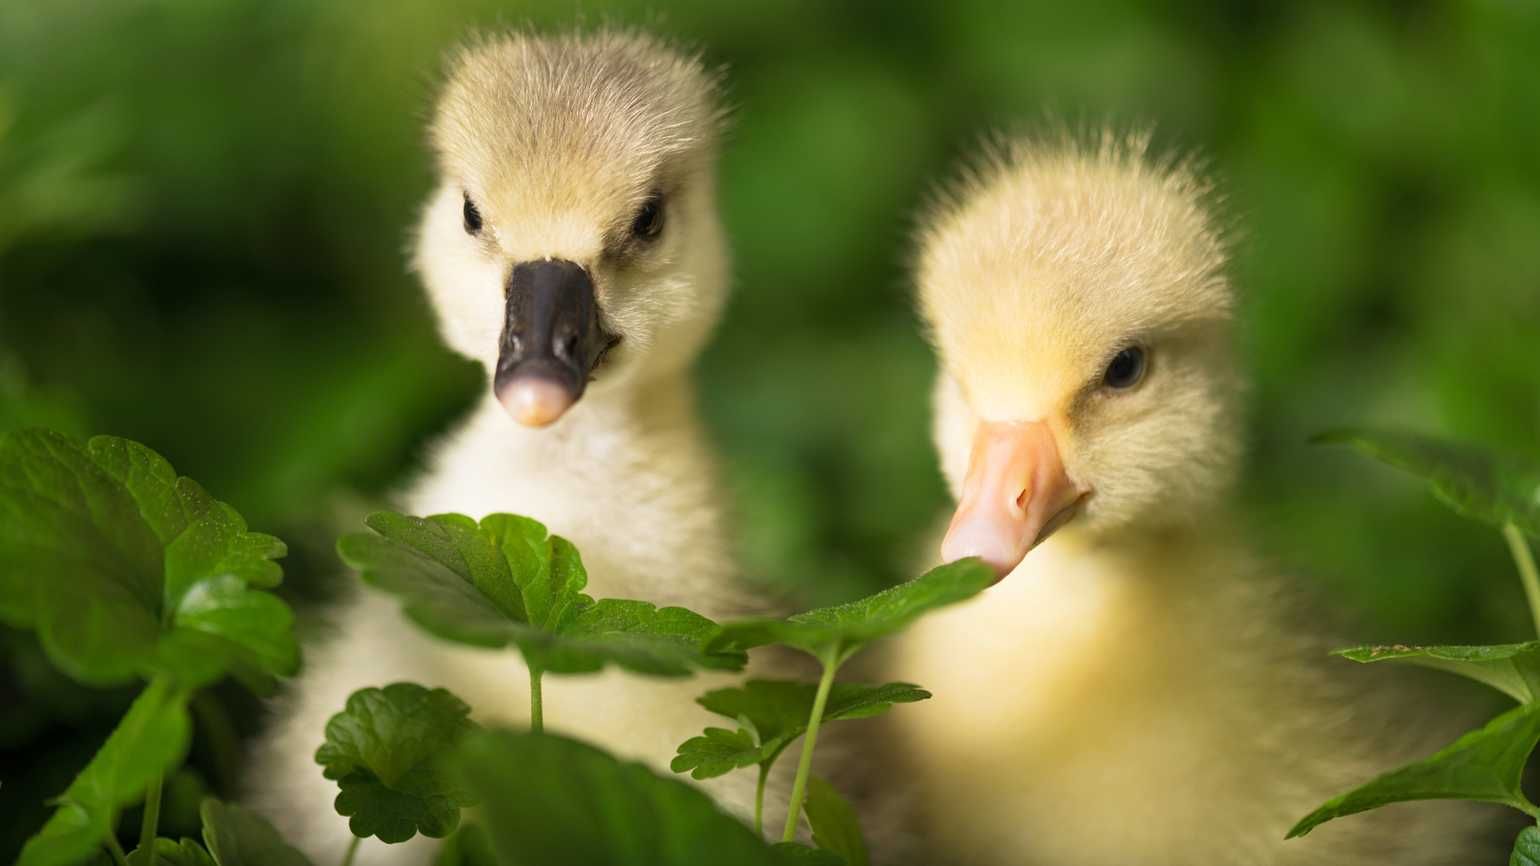 Ducklings; Getty Images